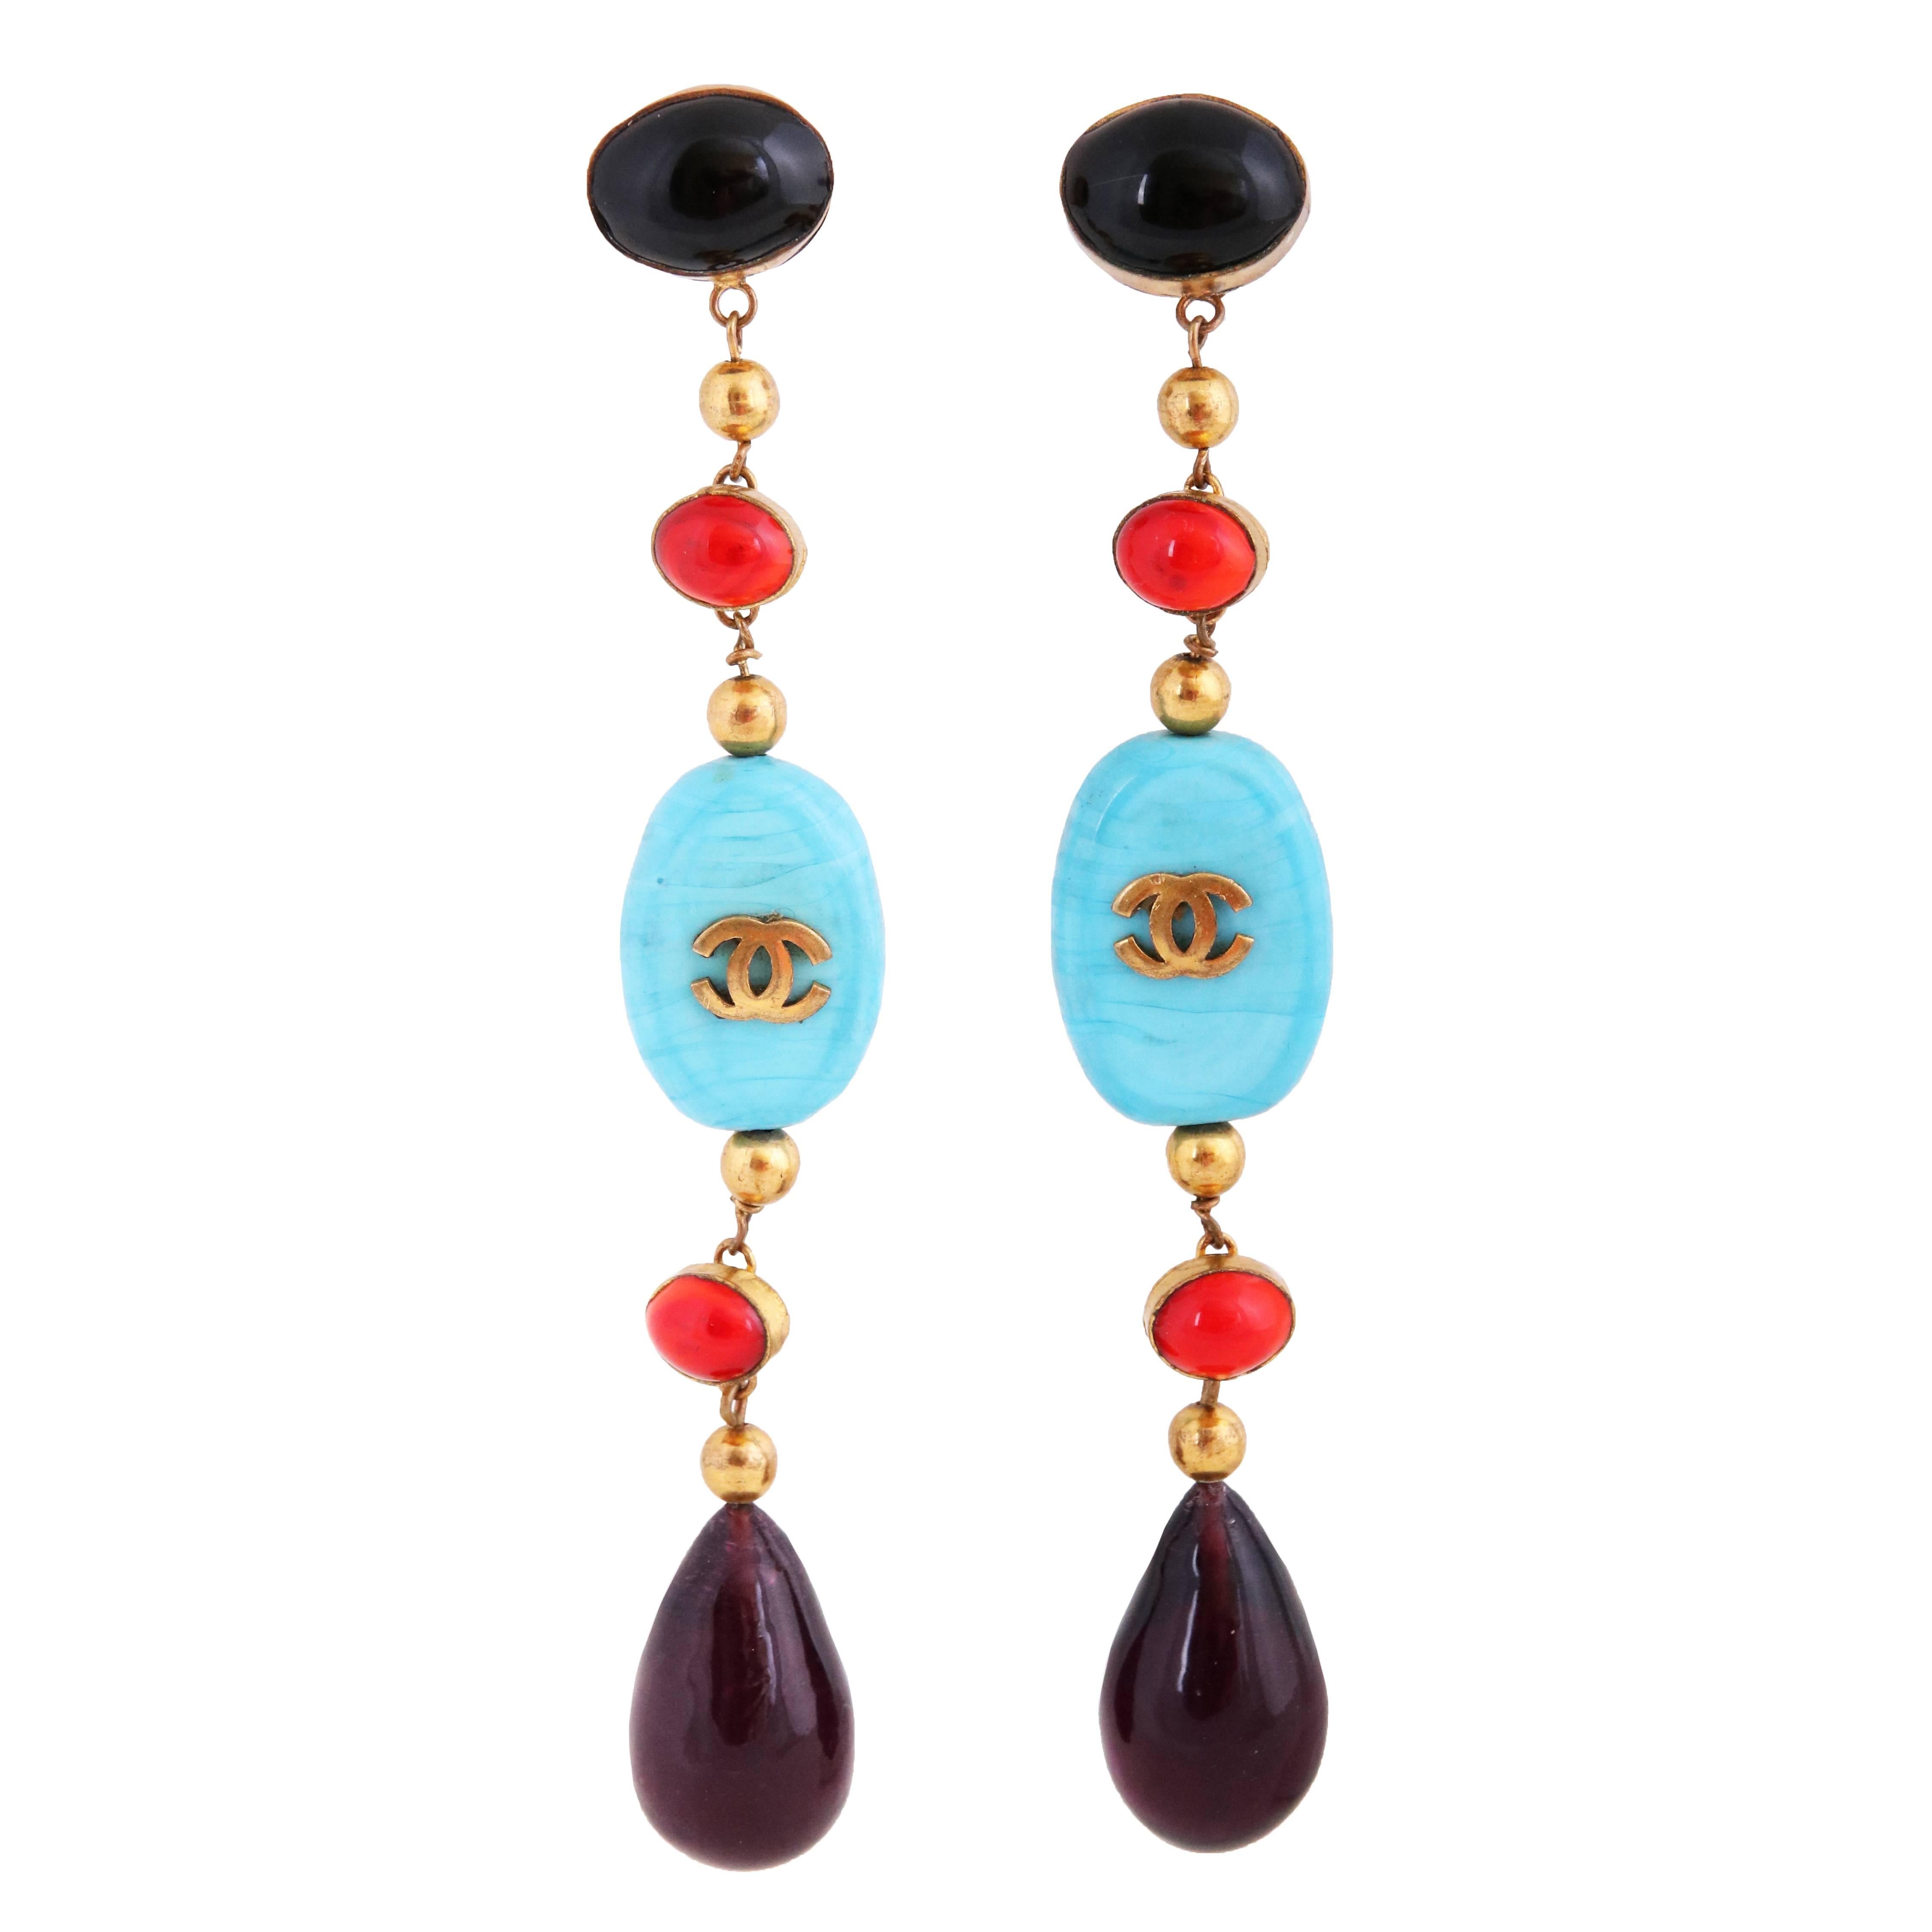 Stunning circa 1979 or 1980 Chanel turquoise, red and amethyst gripoix dangling clip-on earrings. In excellent condition.
MEASUREMENTS:
Length - (approx.) 5